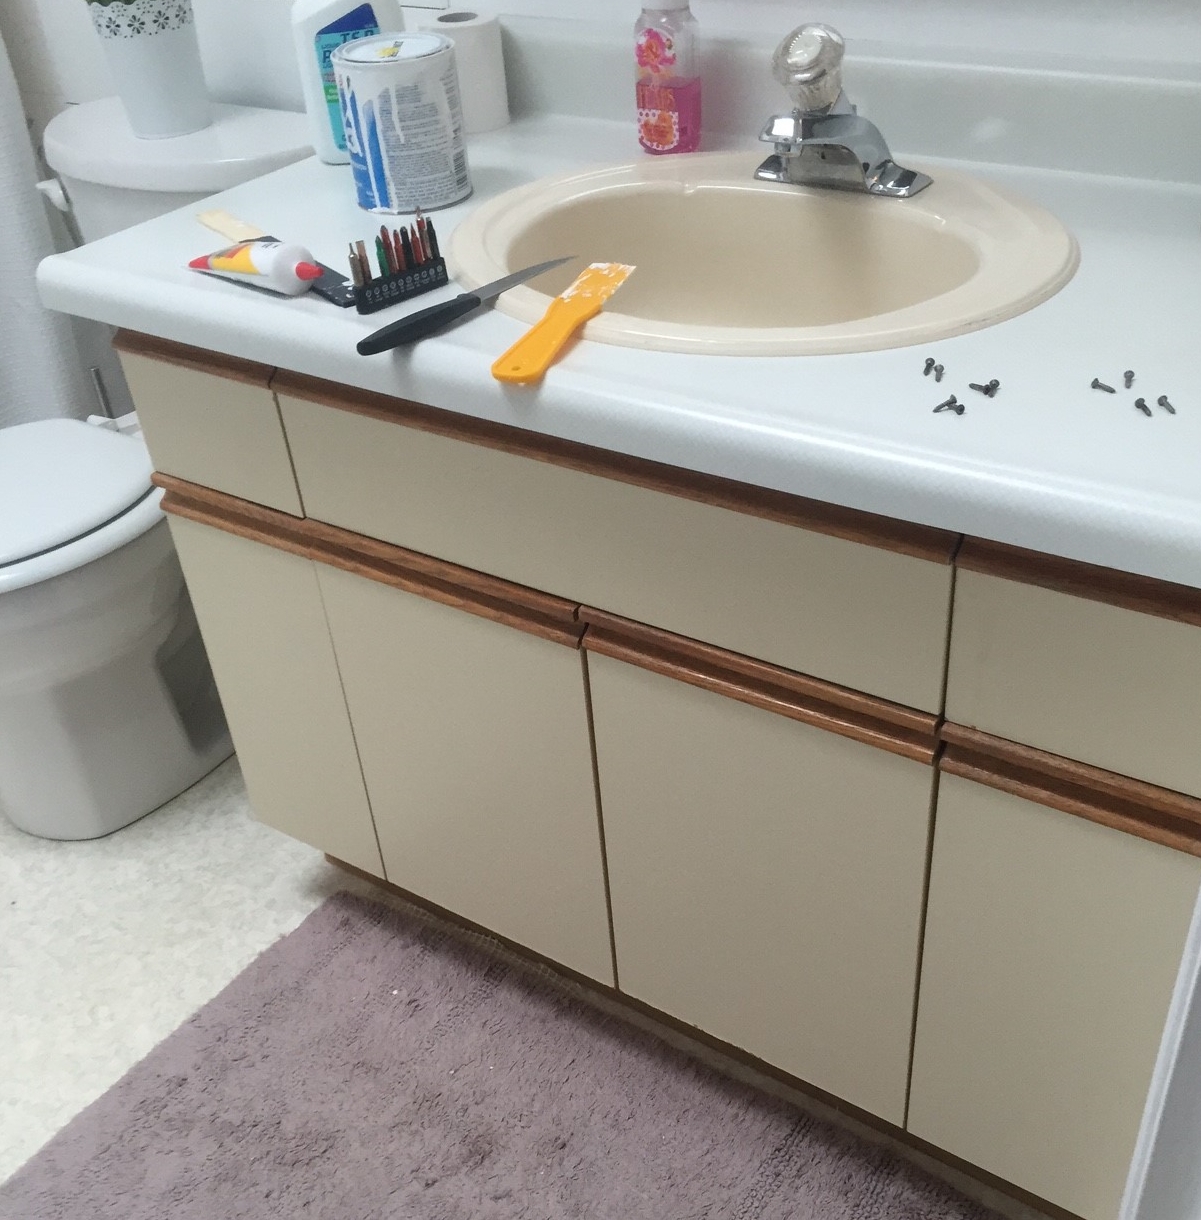 Bathroom Update How To Paint Laminate Cabinets The Penny Drawer,Small House Parallel Modular Kitchen Designs